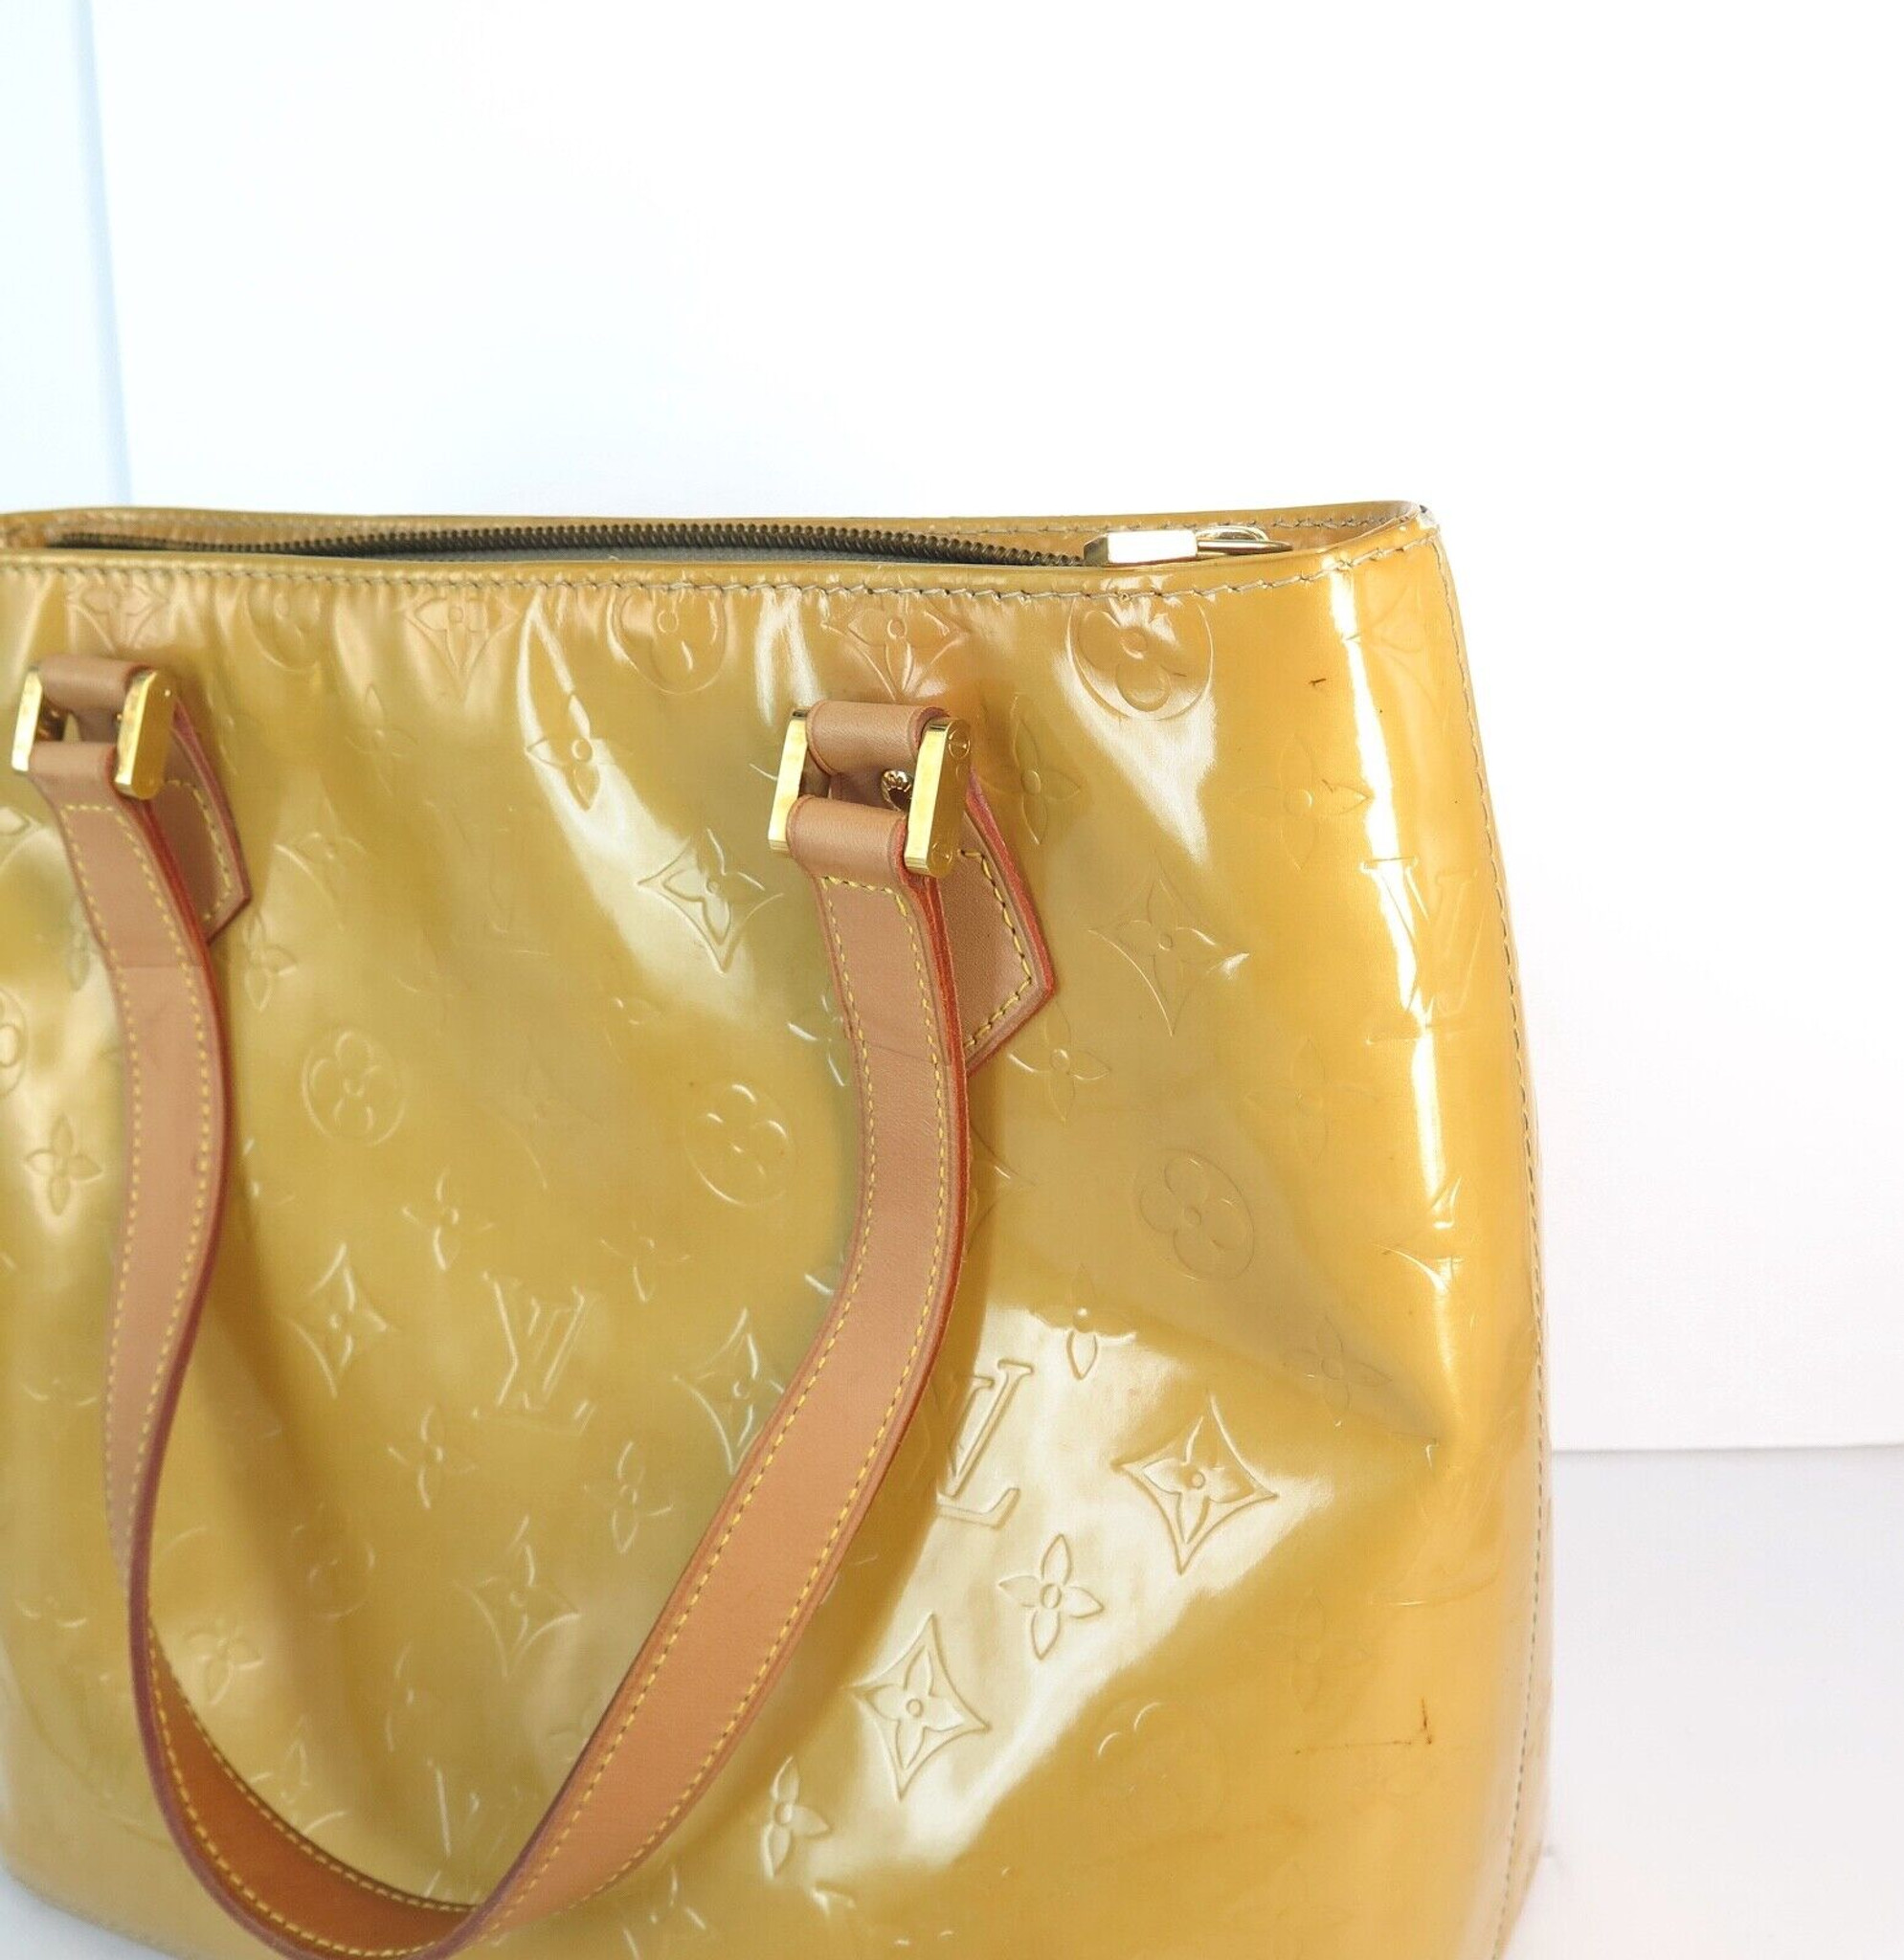 Vintage Louis Vuitton Vernis Houston Tote Bag in Colour Mustard with Dustbag